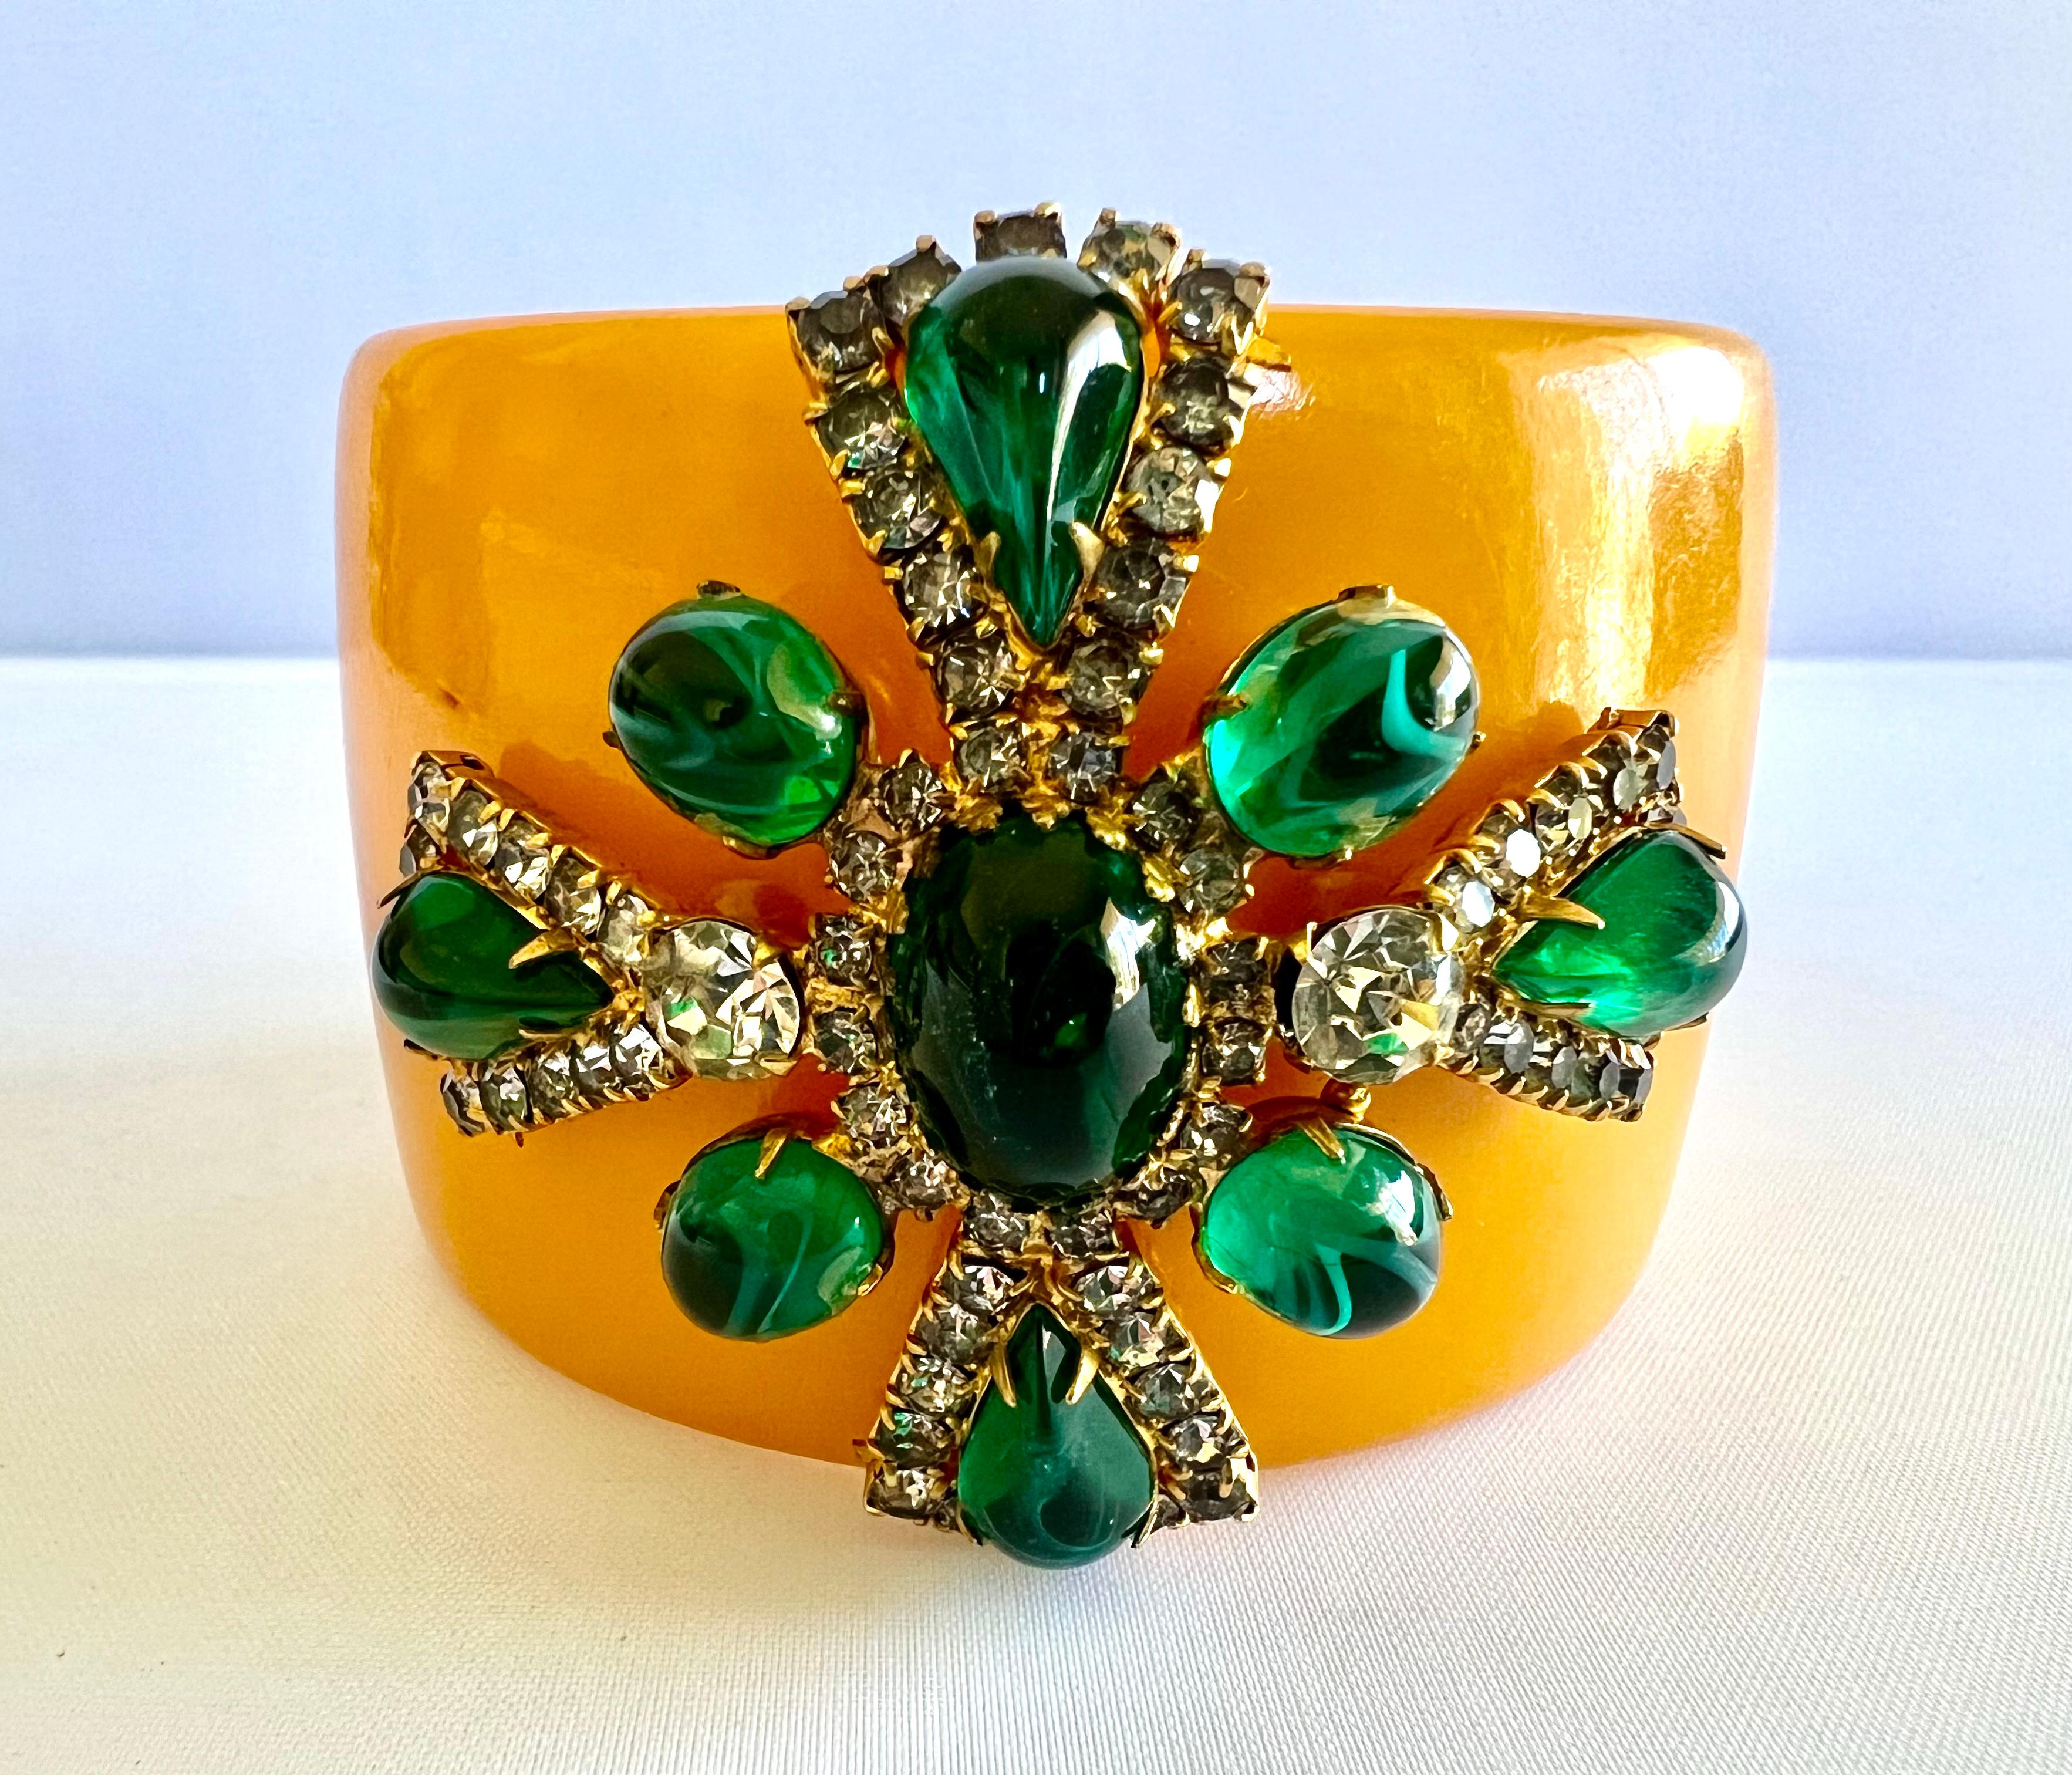 Faux cabochon emerald and diamante butterscotch bakelite bangle bracelet accented by a sizeable Maltese cross. 